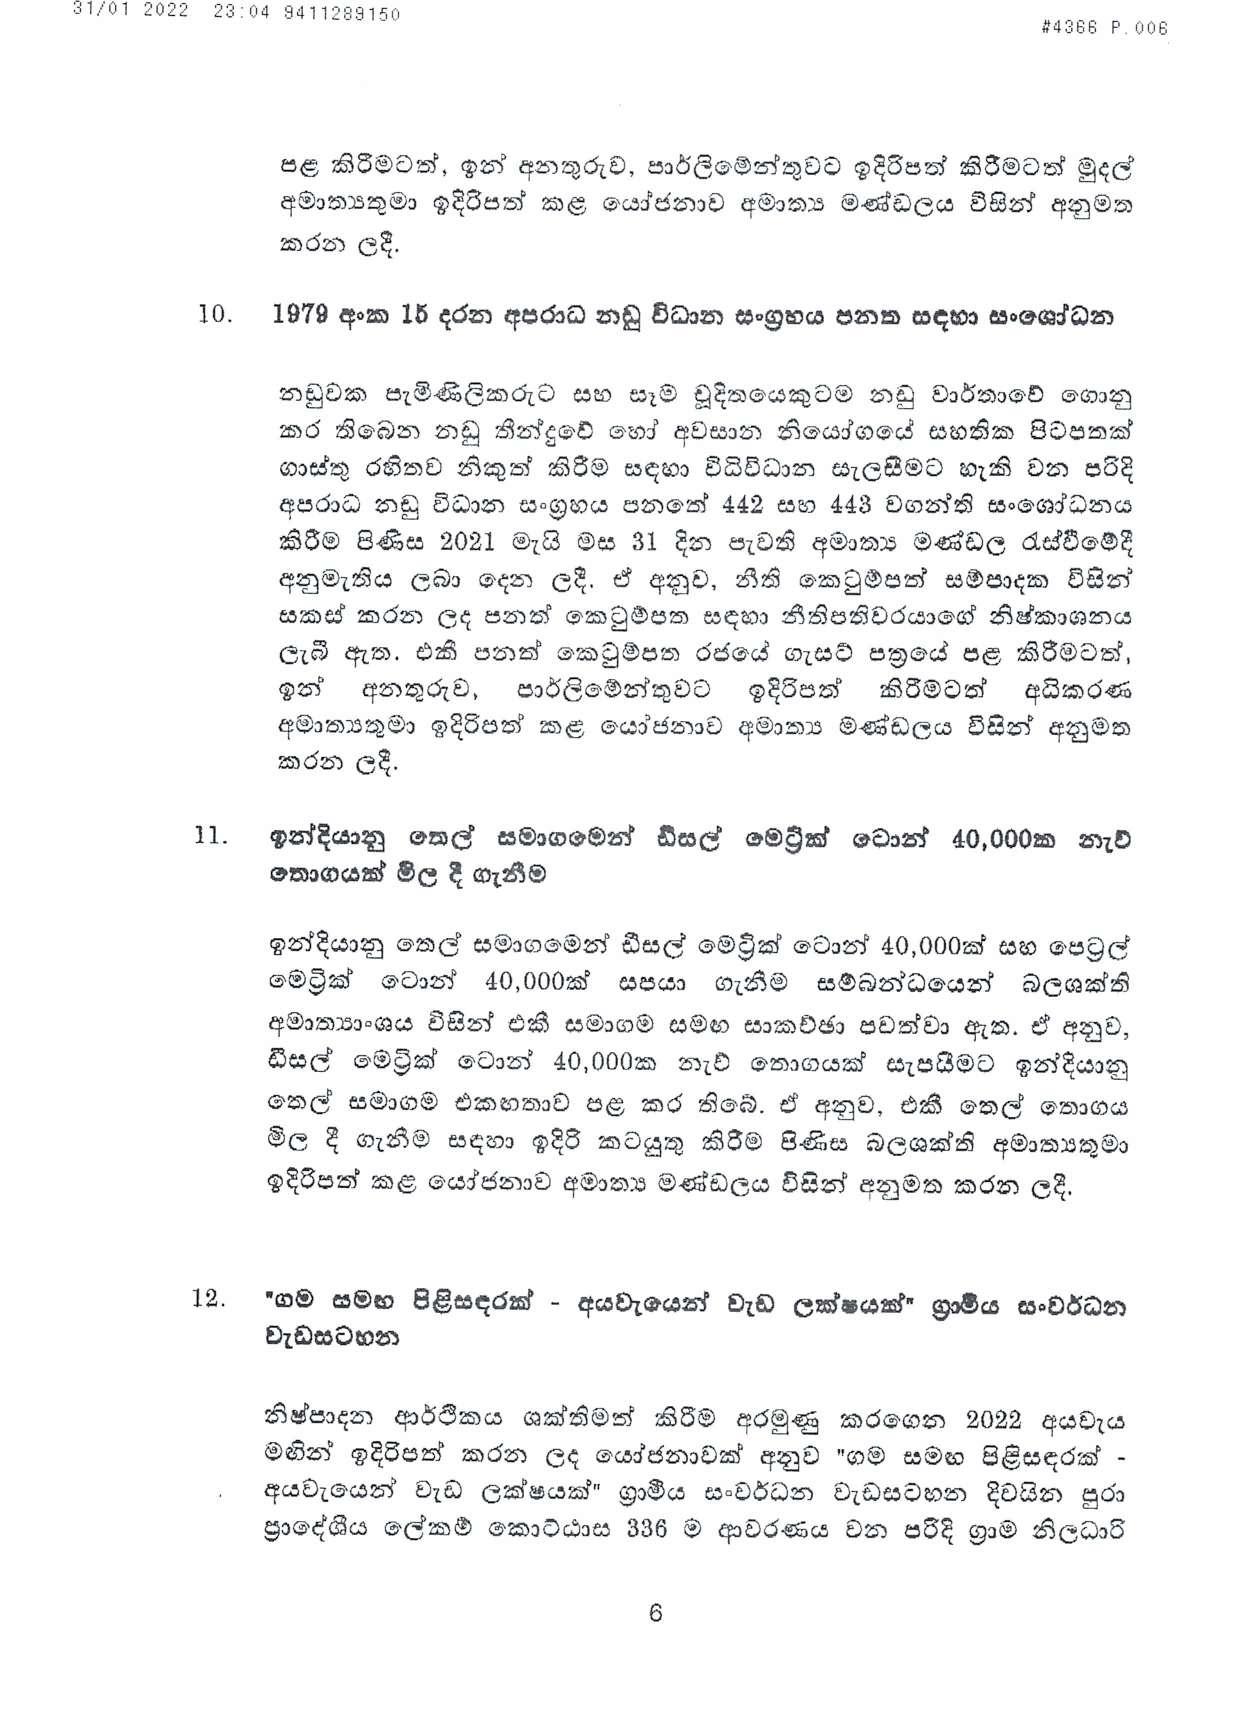 Cabinet Decision on 31.01.2022 page 006